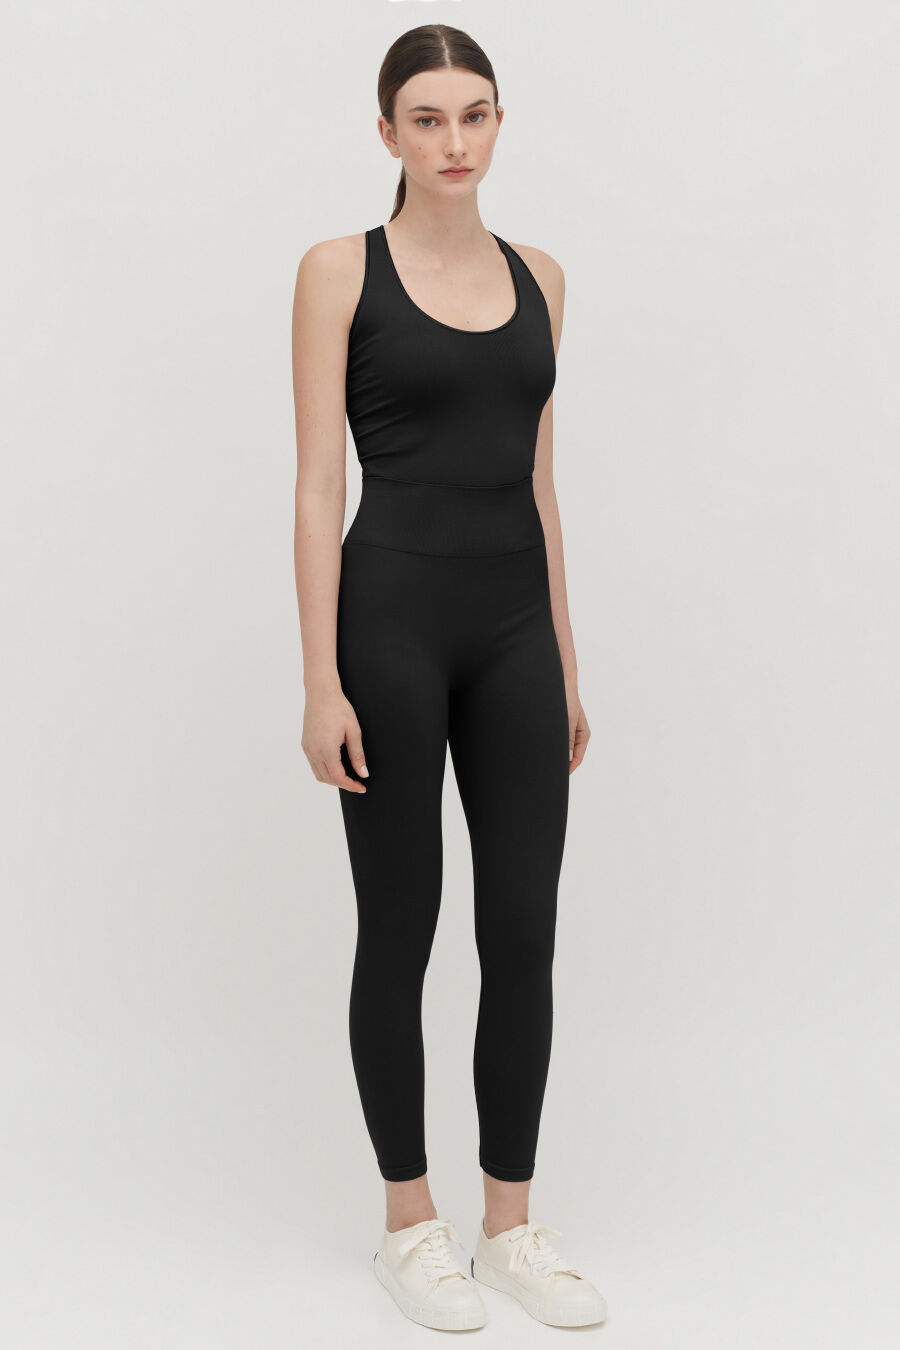 The perfect bodysuit does exist! This tank style from Auden has 4-way  stretch and feels like second skin. We'll take one in every col